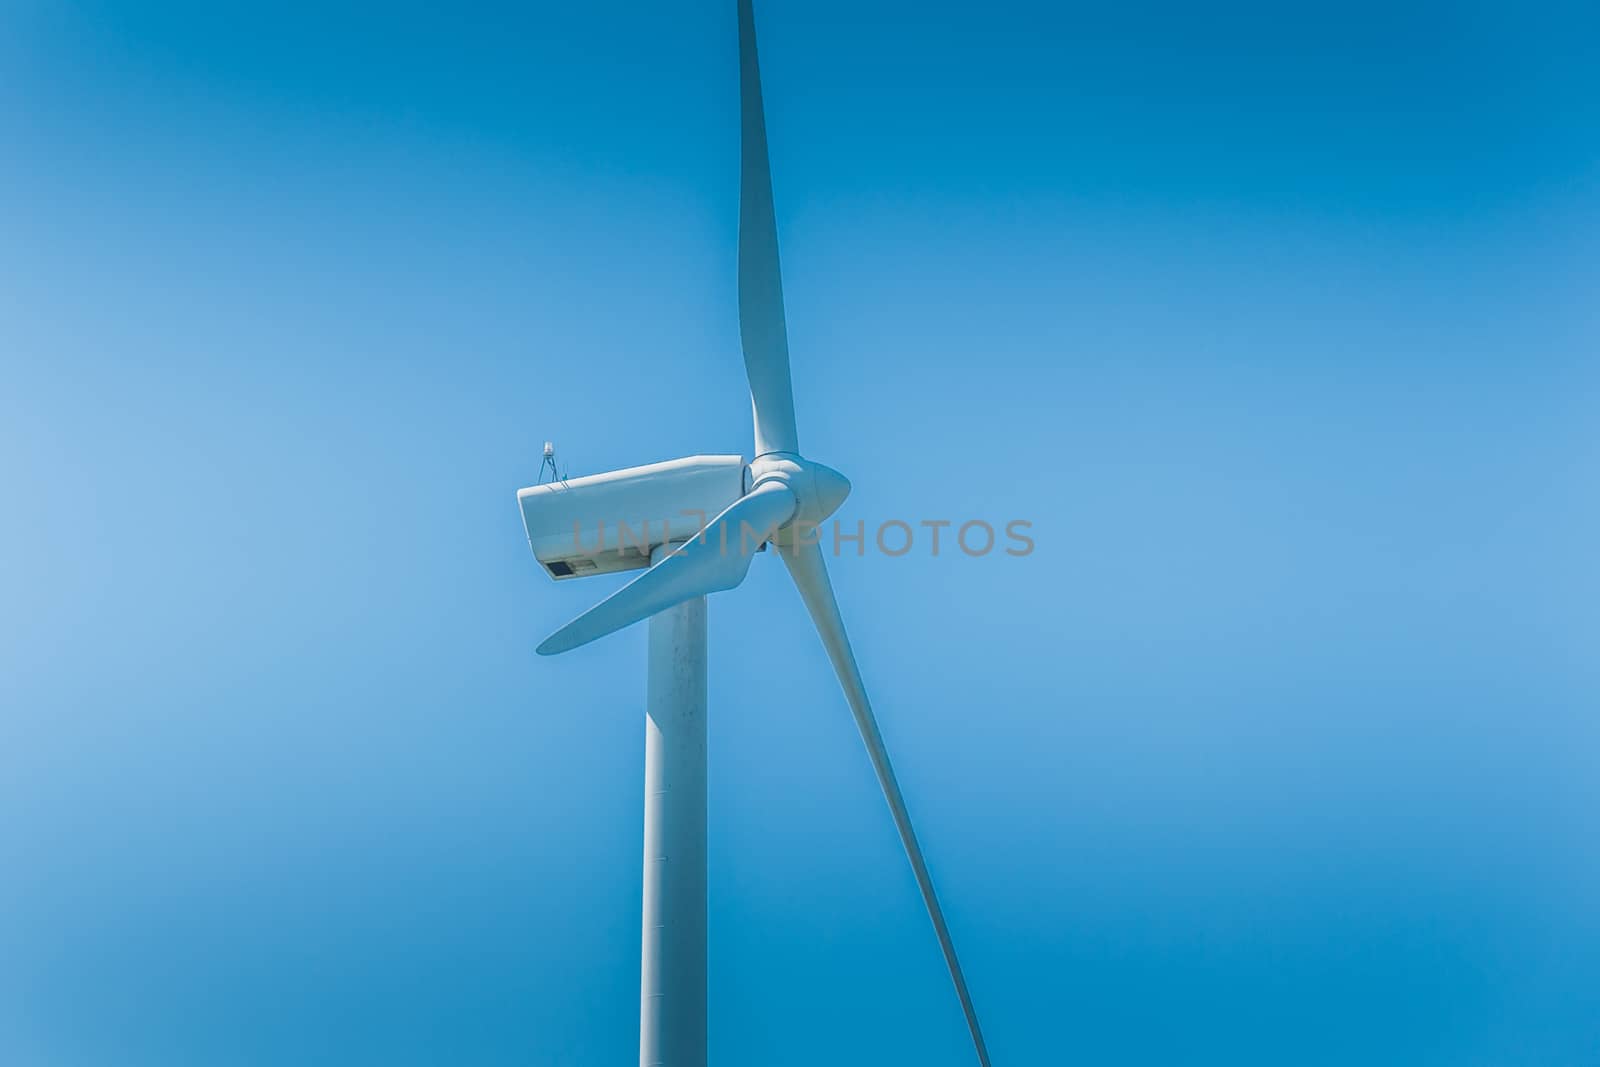 wind turbine a renewable energy source that respects the environment